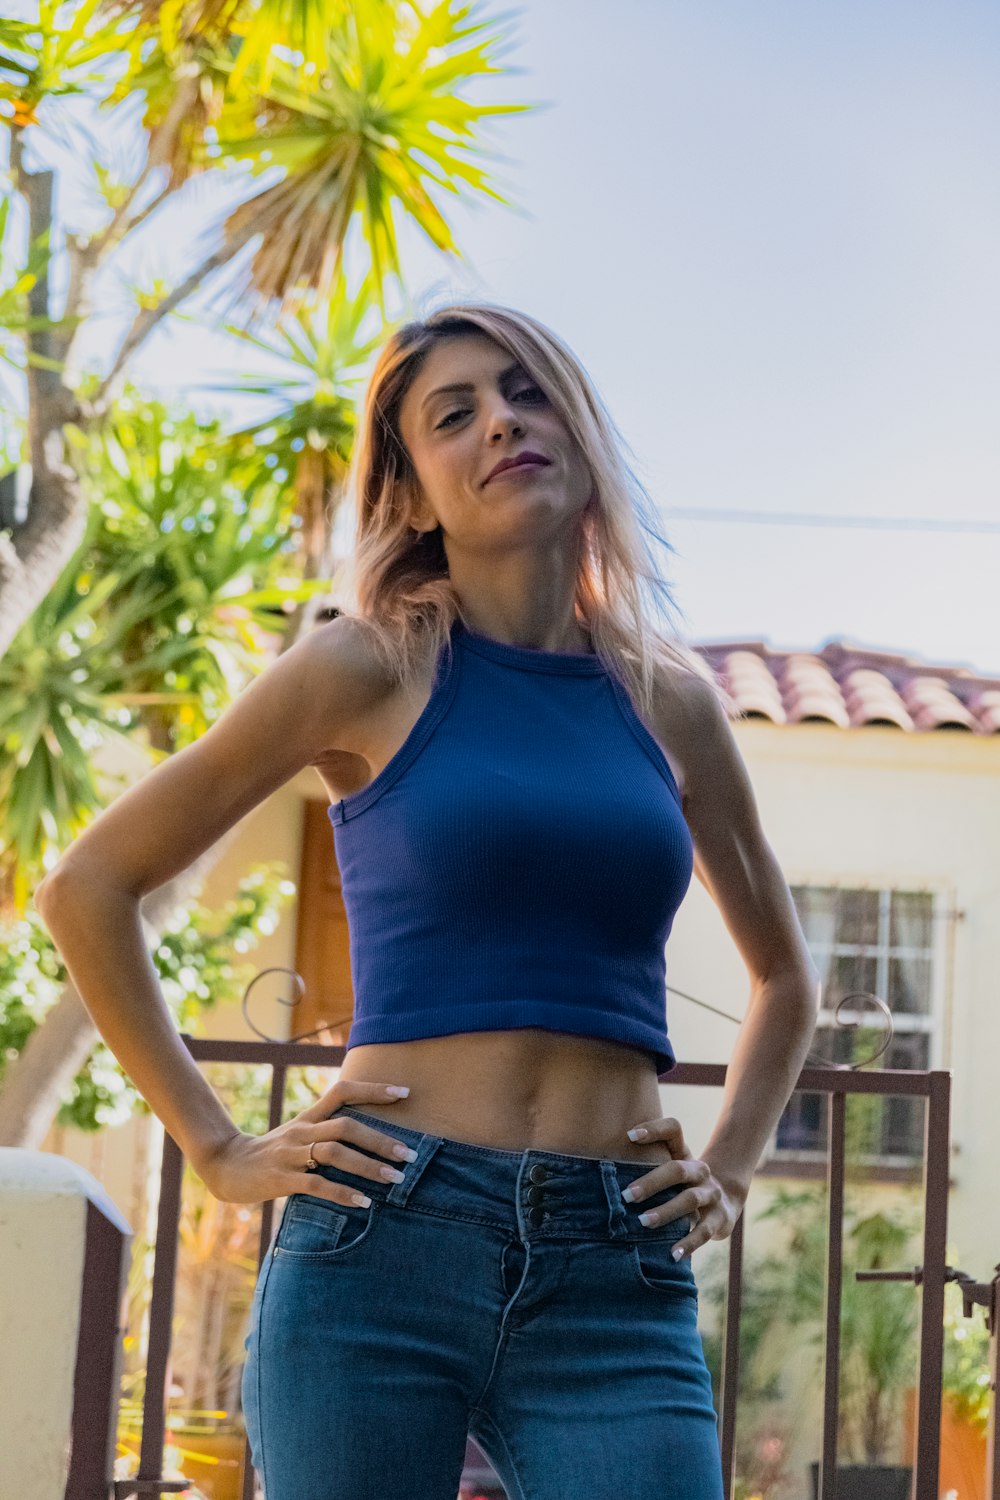 woman in blue tank top and blue denim shorts standing near green plants during daytime